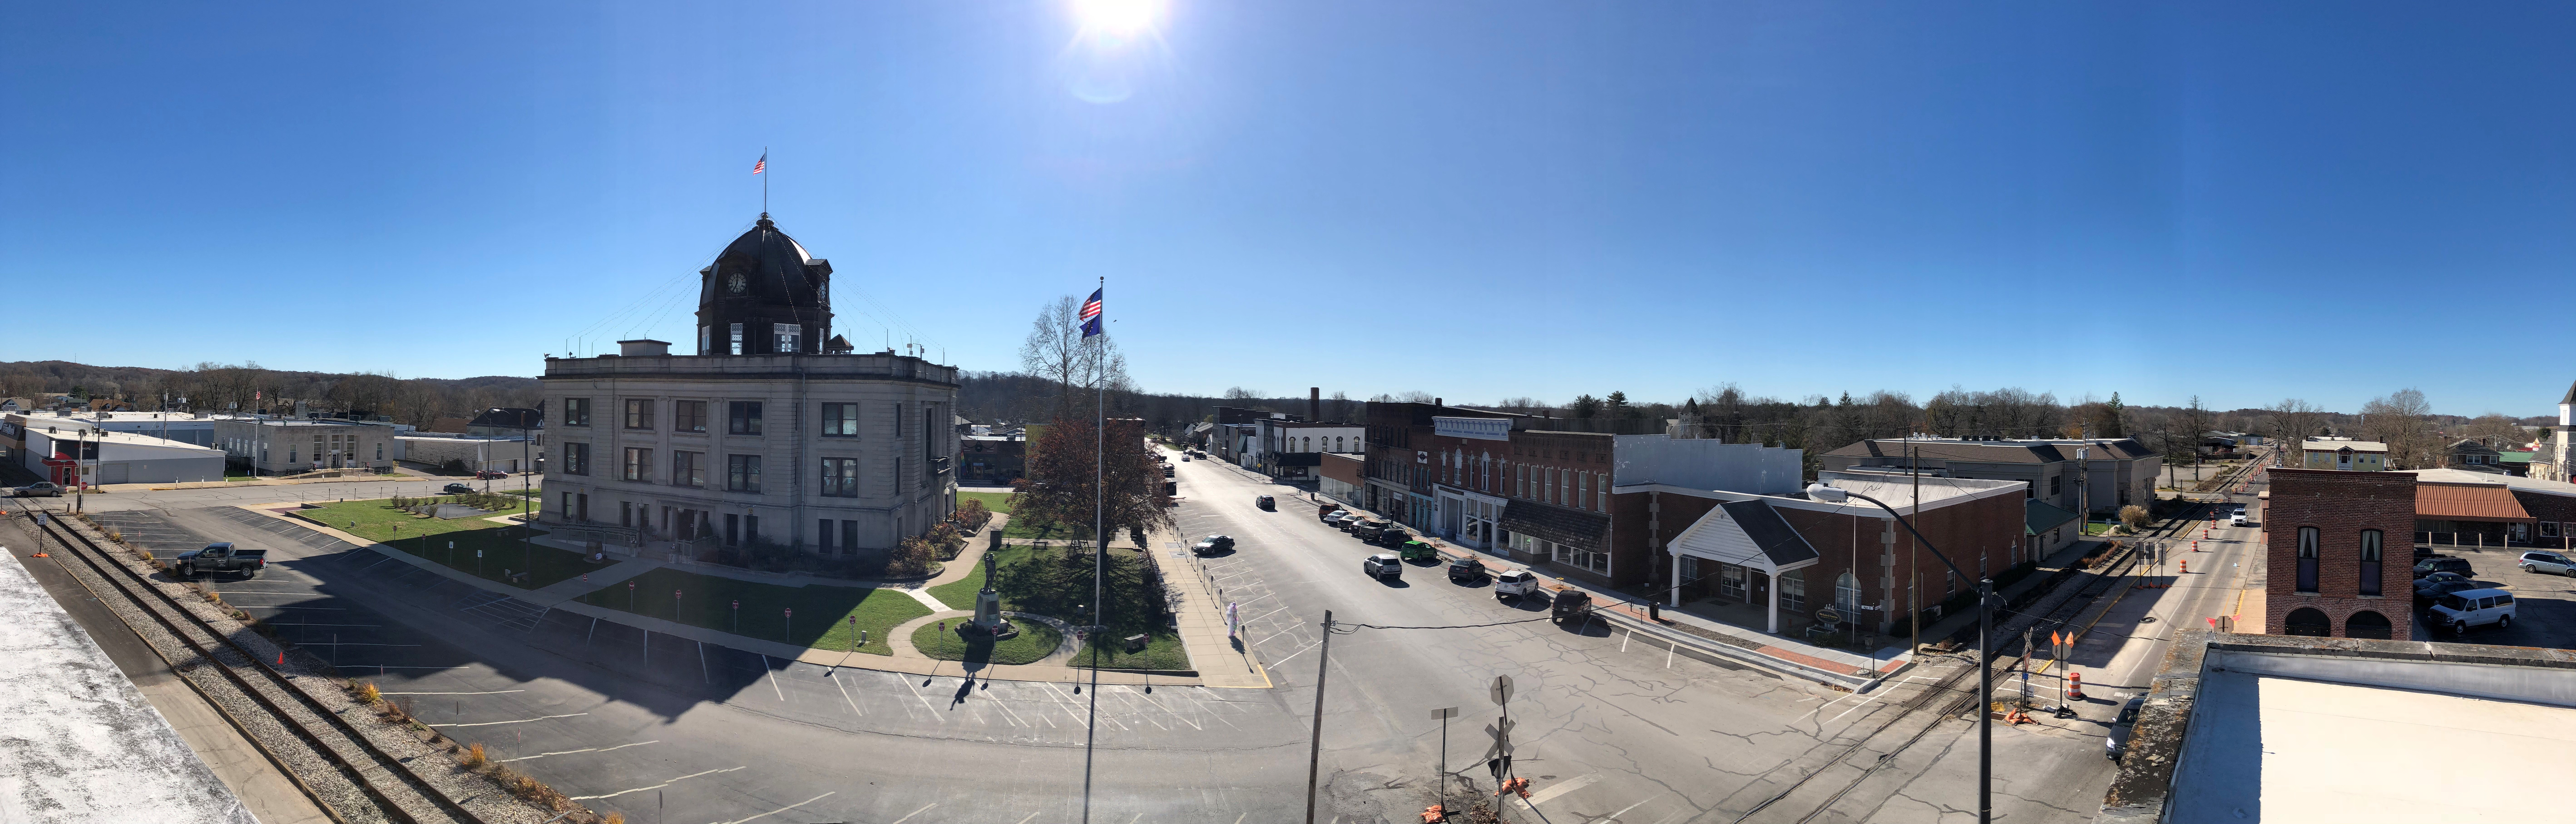 The view from the roof of our building overlooking downtown Spencer